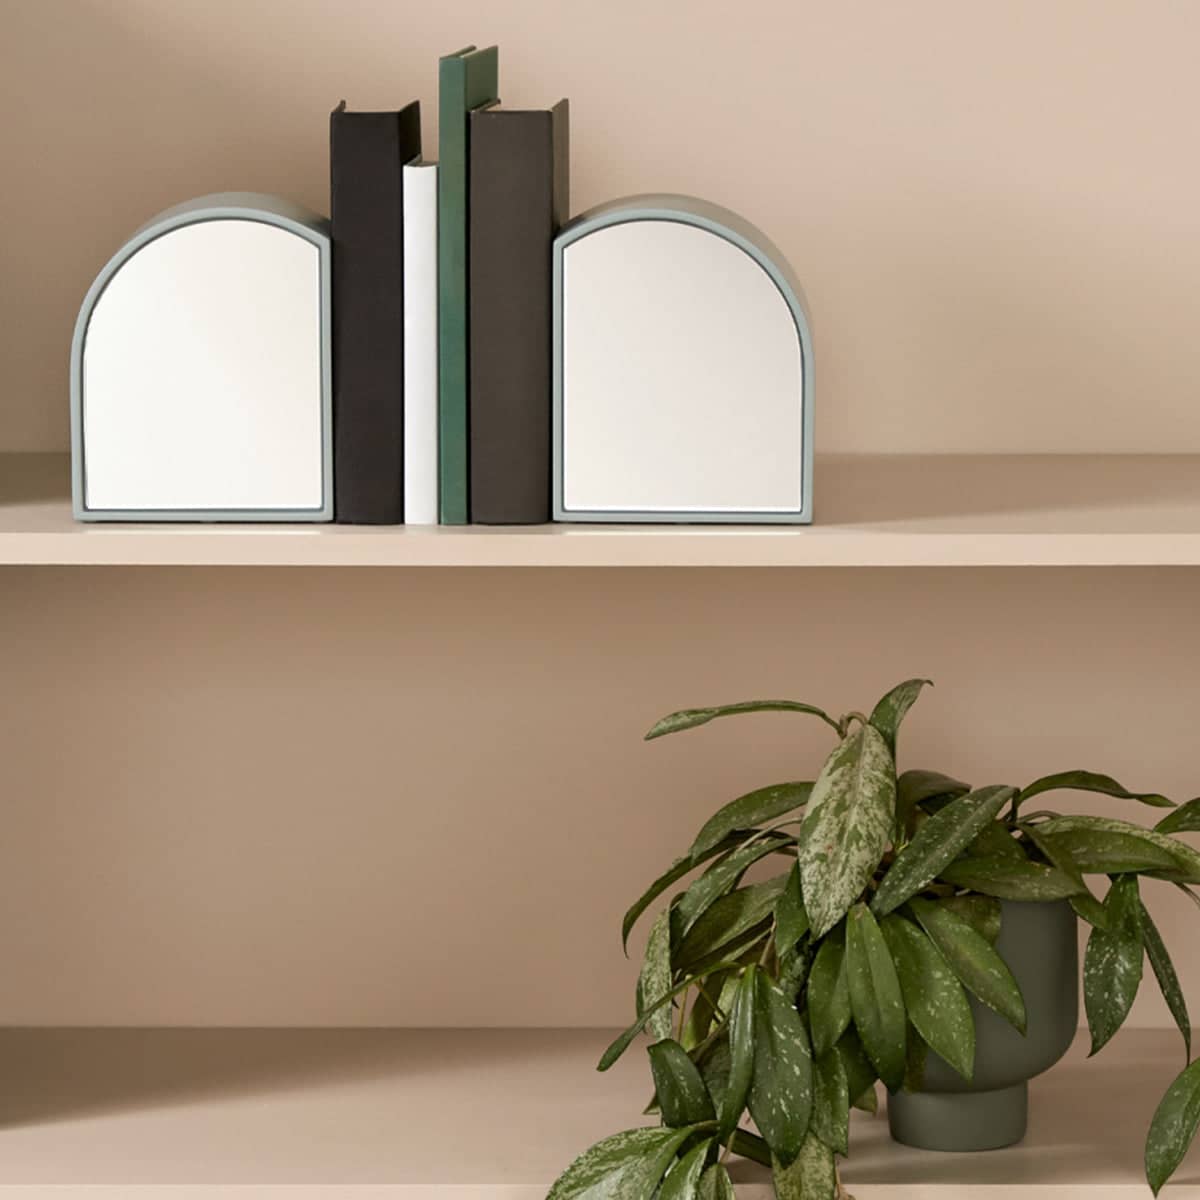 Archie Mirror Bookends - Blue